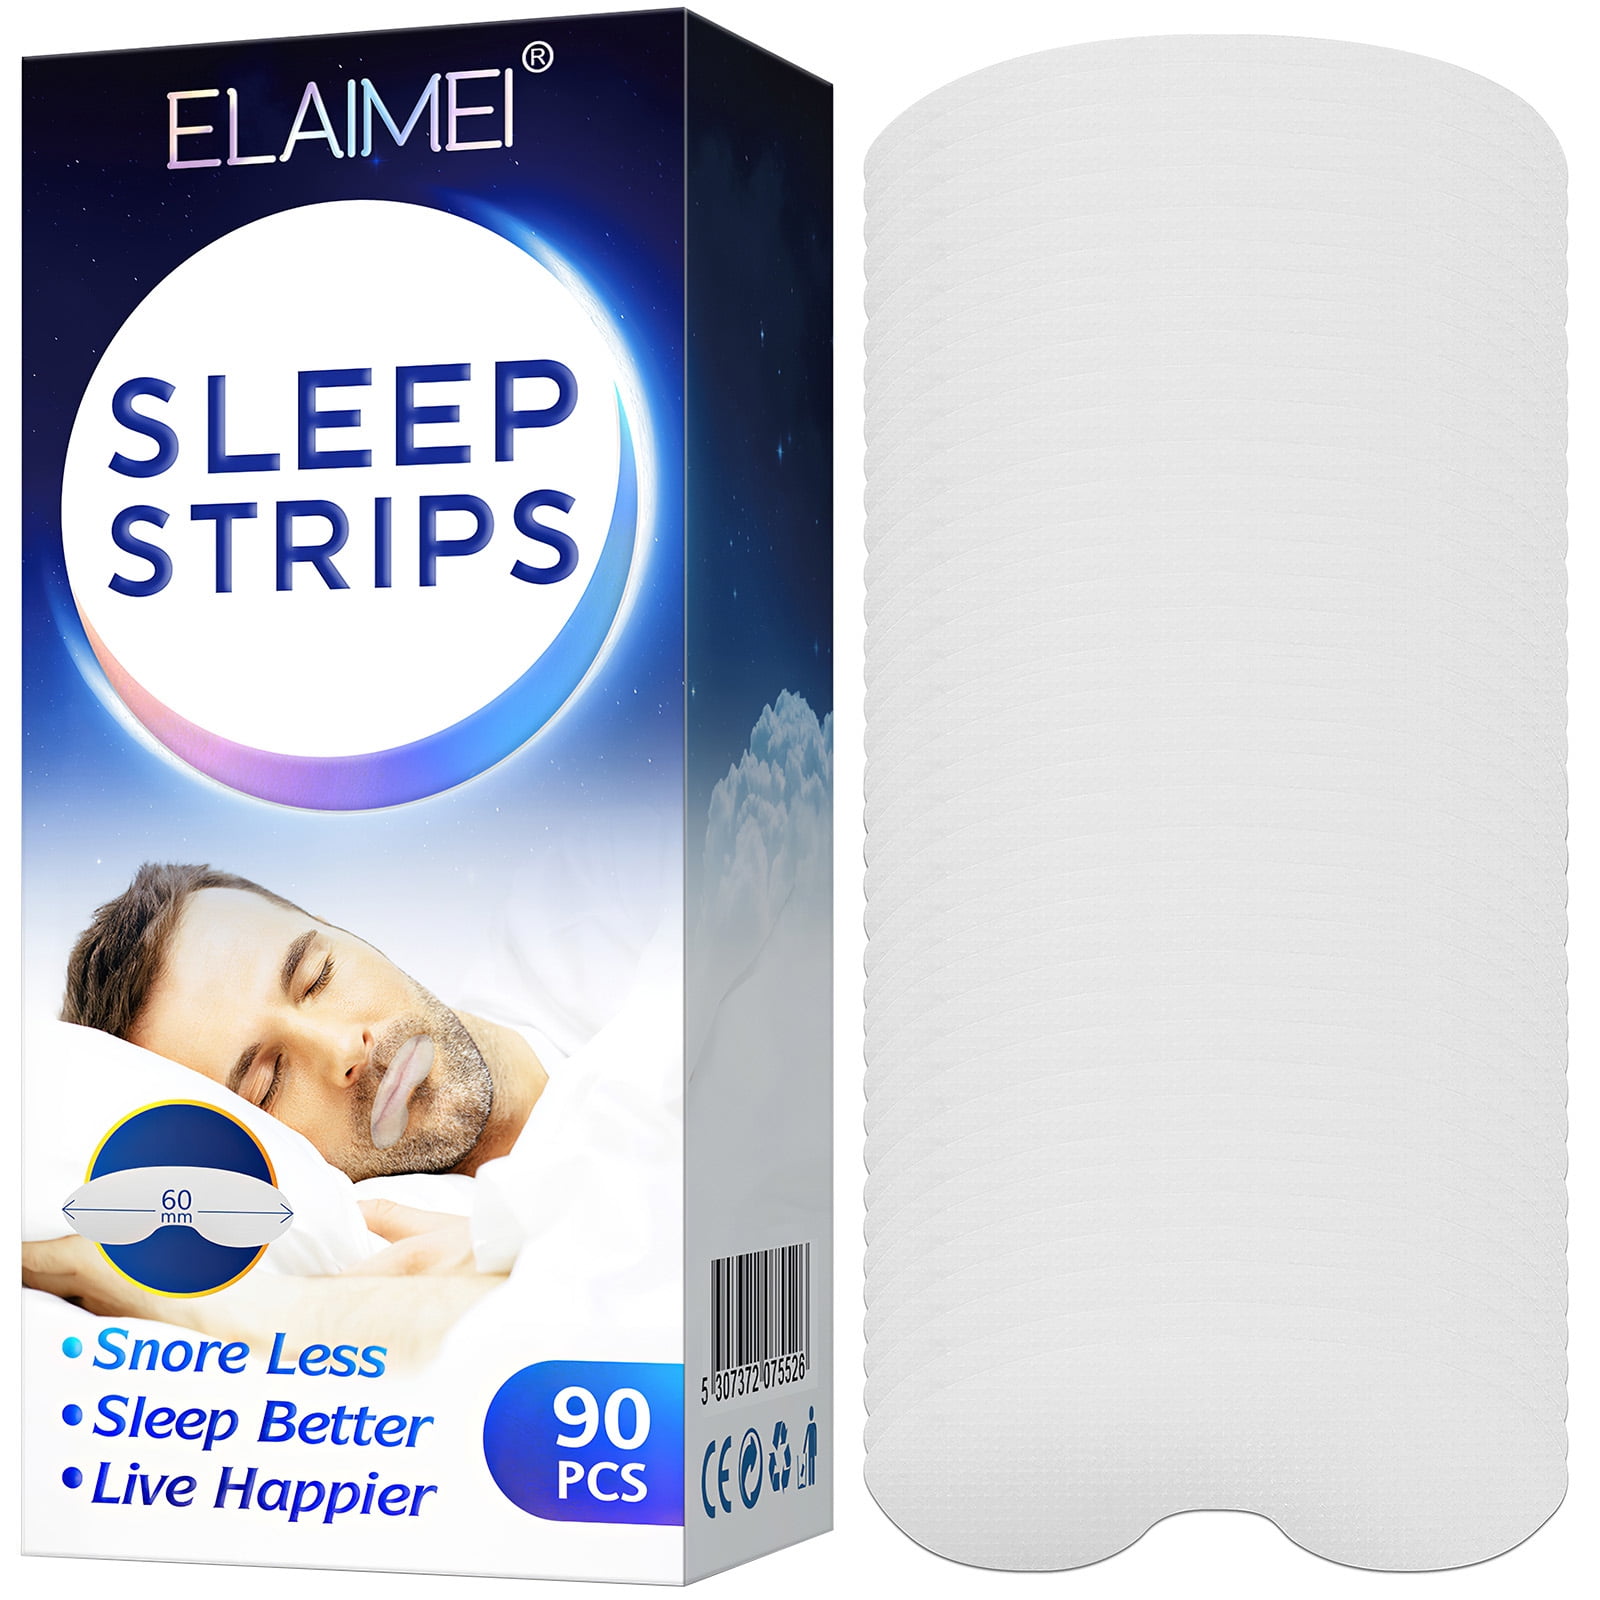 Mouth Tape for Sleeping 90 Pcs,Advanced Gentle Sleep Strips Better Nose Breathing,Less Mouth Breathing,Improved Nighttime Sleeping